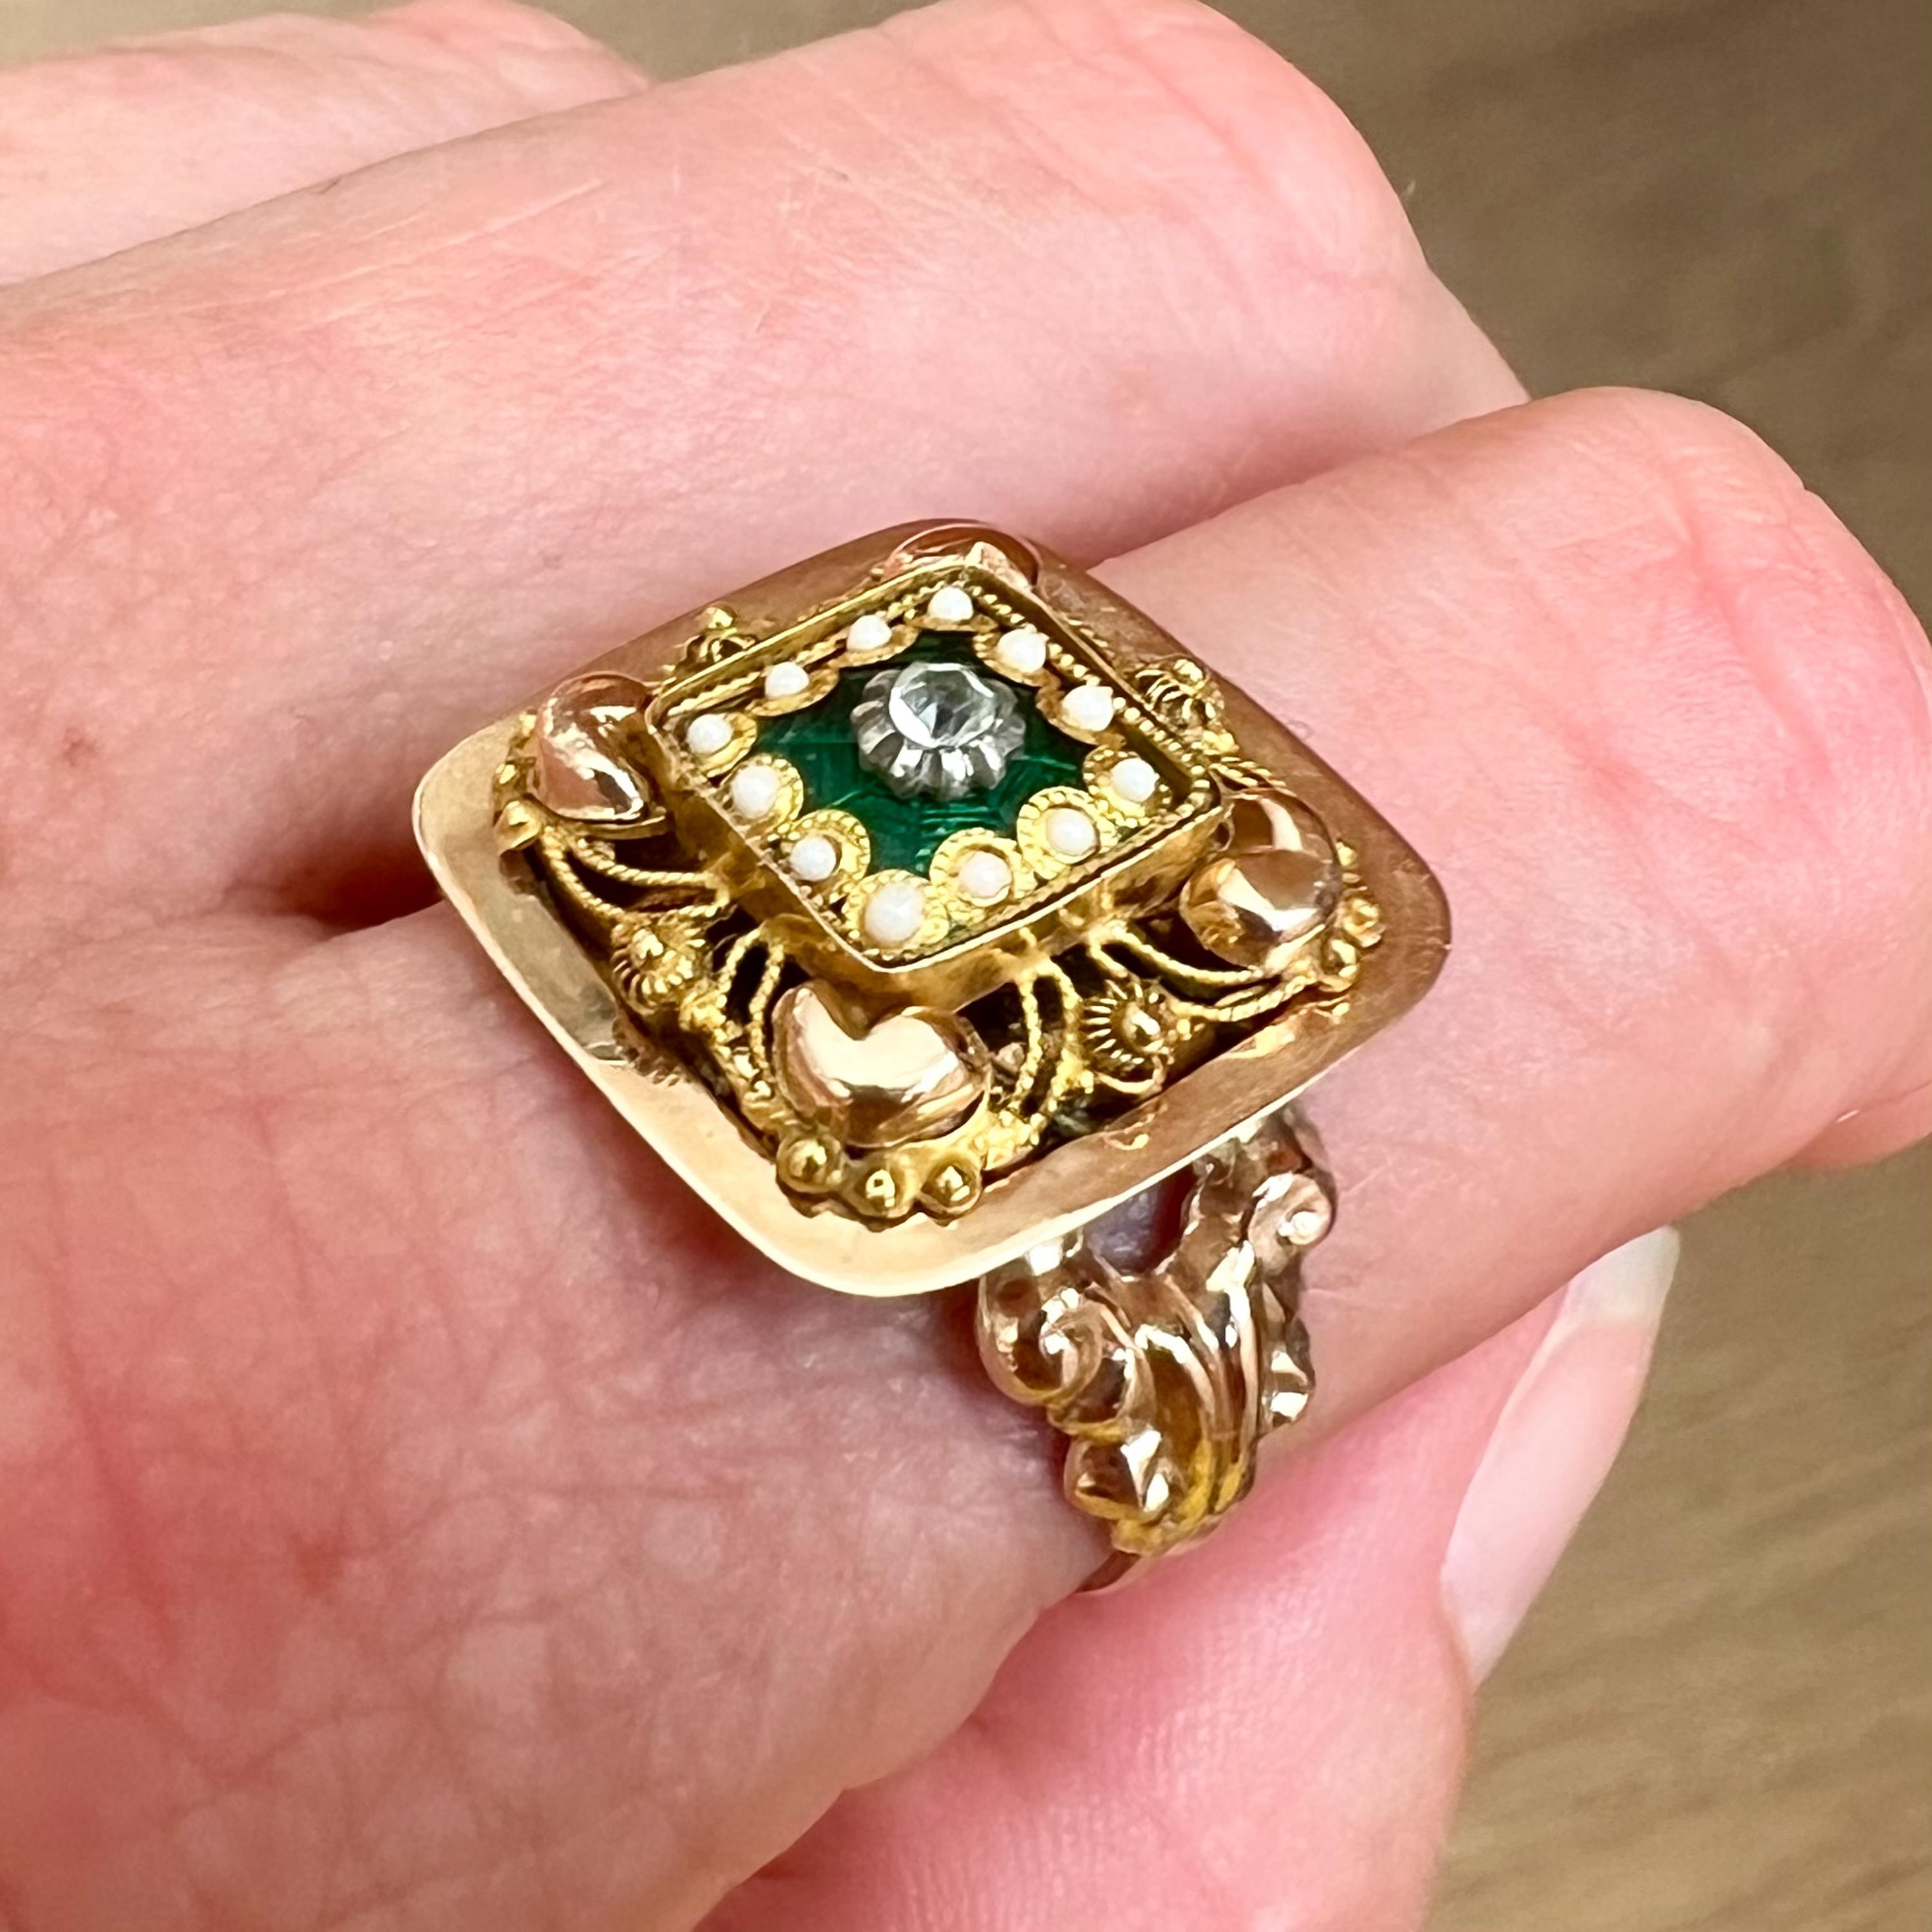 This is an antique square shaped 14 karat yellow gold ring set with green enamel, seed pearls and a  rhinestone. The design of this Victorian ring is made with beautiful filigree and cannetille work around a smaller square with twelve seed pearls